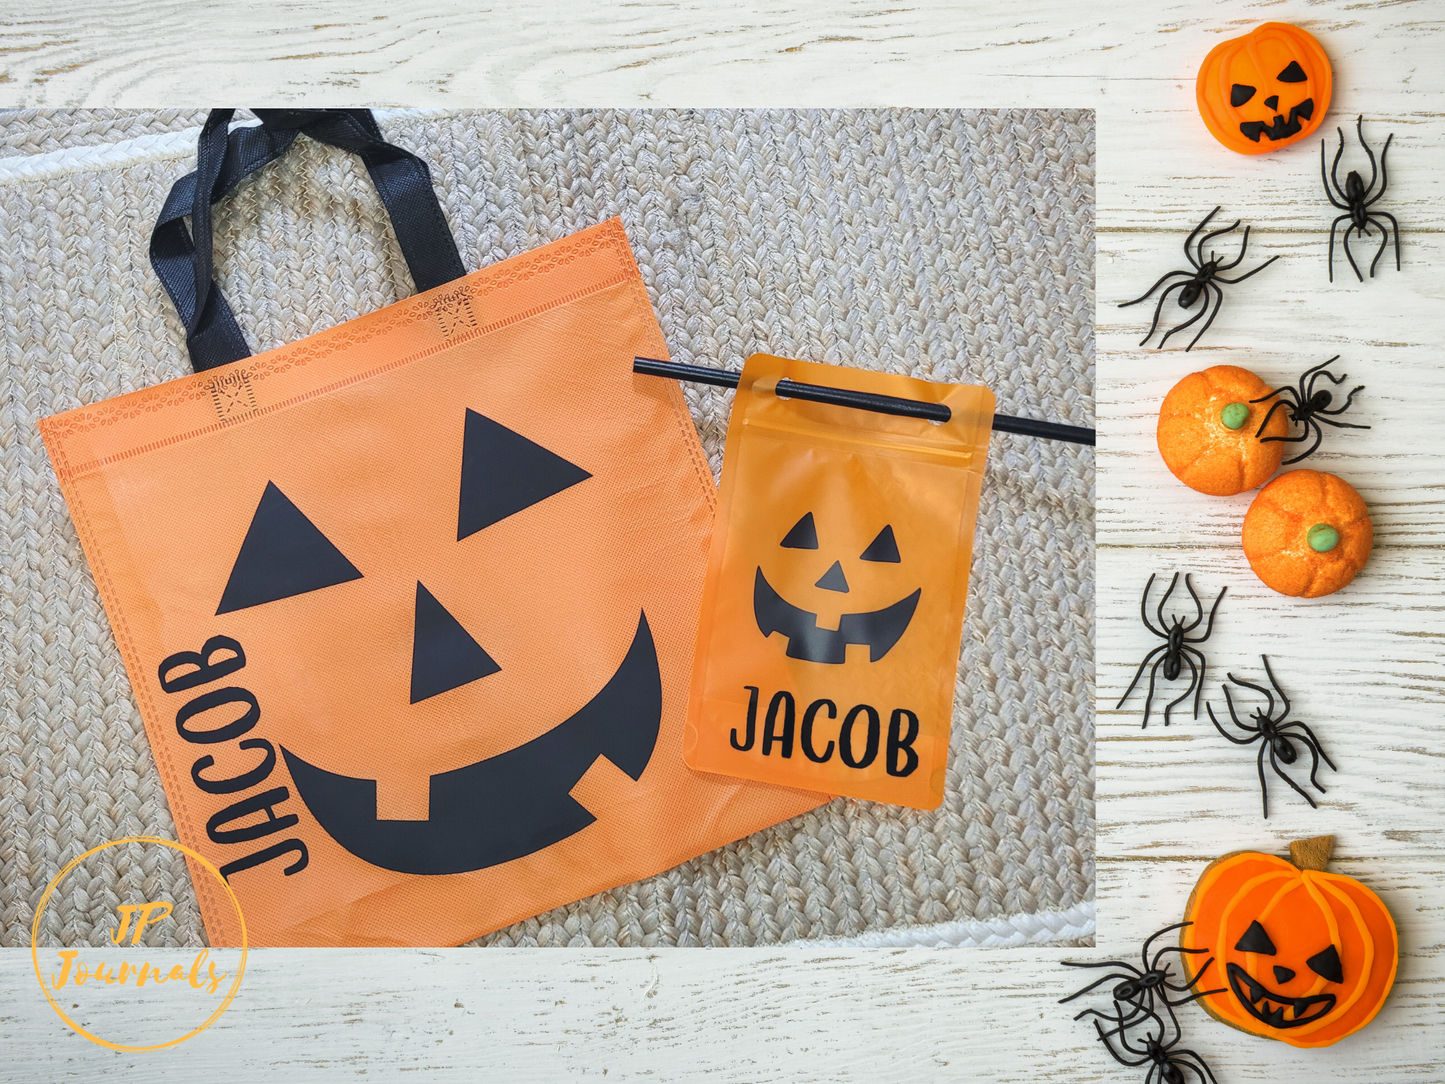 PTIONAL: ADD A MATCHING RE-USABLE DRINK POUCH TO COMPLETE THE HALLOWEEN FUN!  